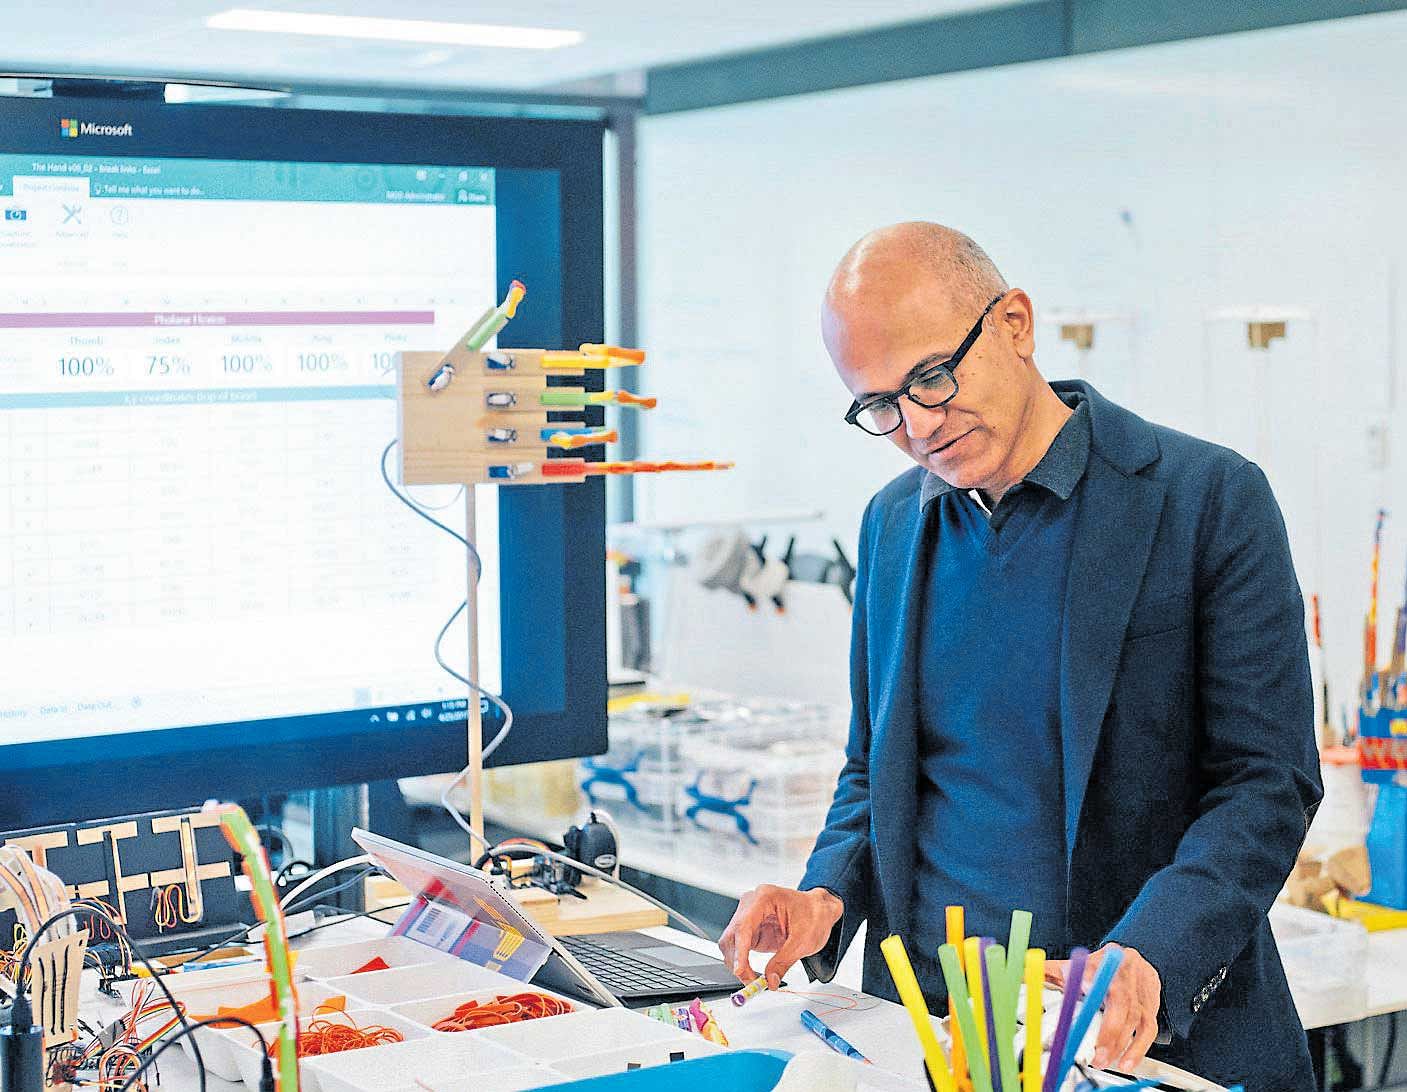 Satya Nadella, chief executive of Microsoft, in the company's Hacking STEM team lab at Microsoft headquarters in Redmond, Washington. The company's relevance in schools in the US is in jeopardy after years of progress by Google. NYT